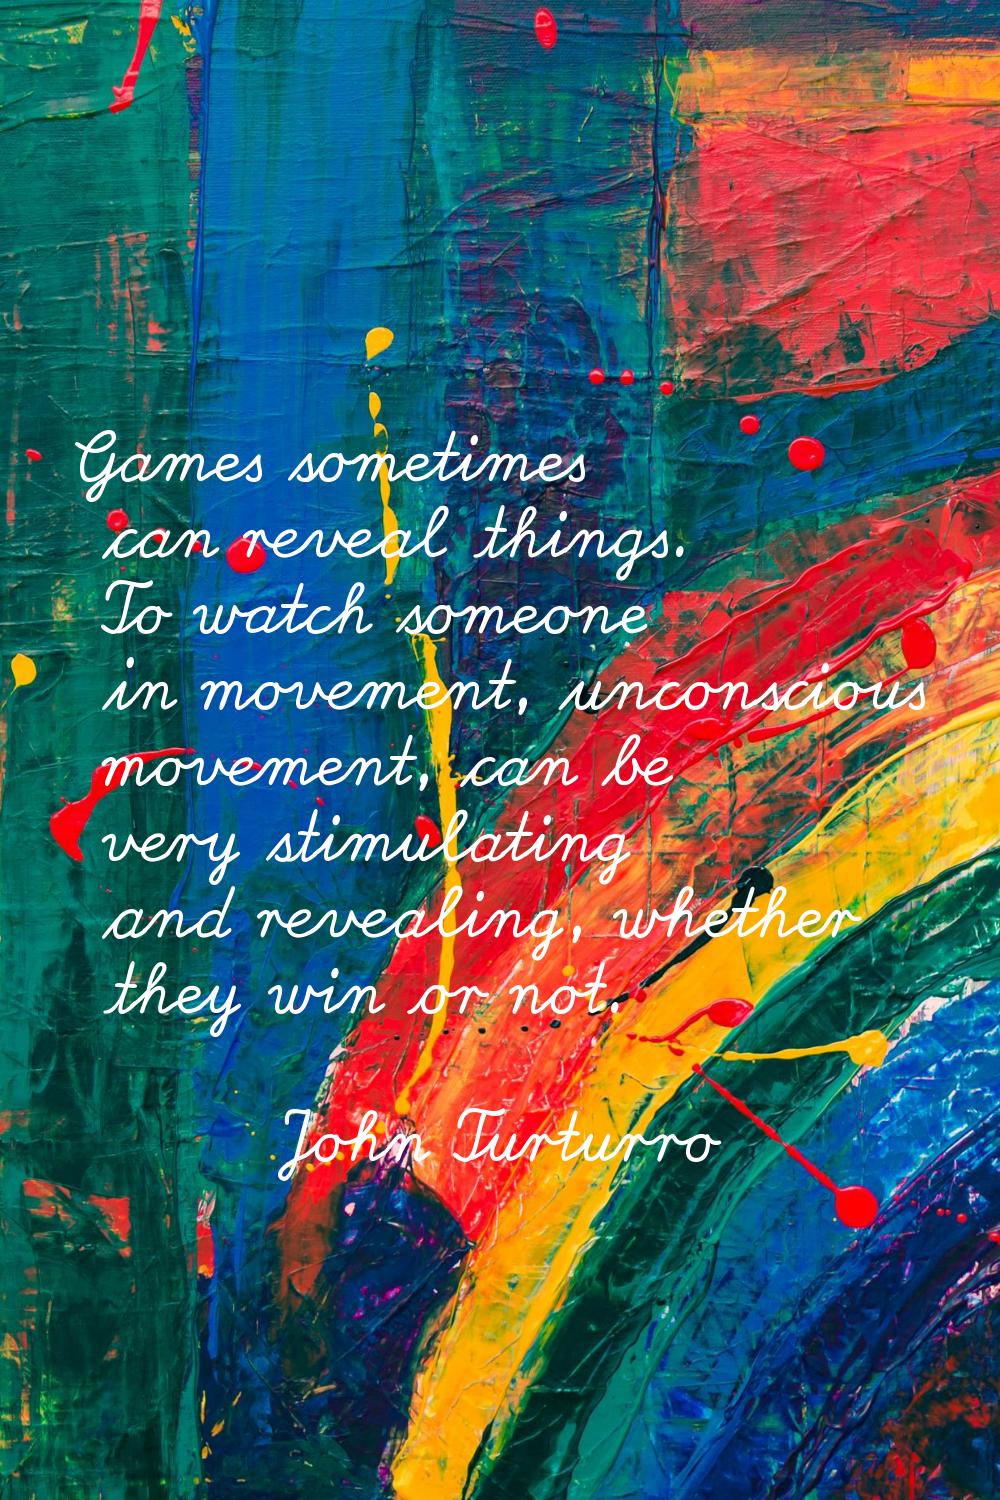 Games sometimes can reveal things. To watch someone in movement, unconscious movement, can be very 